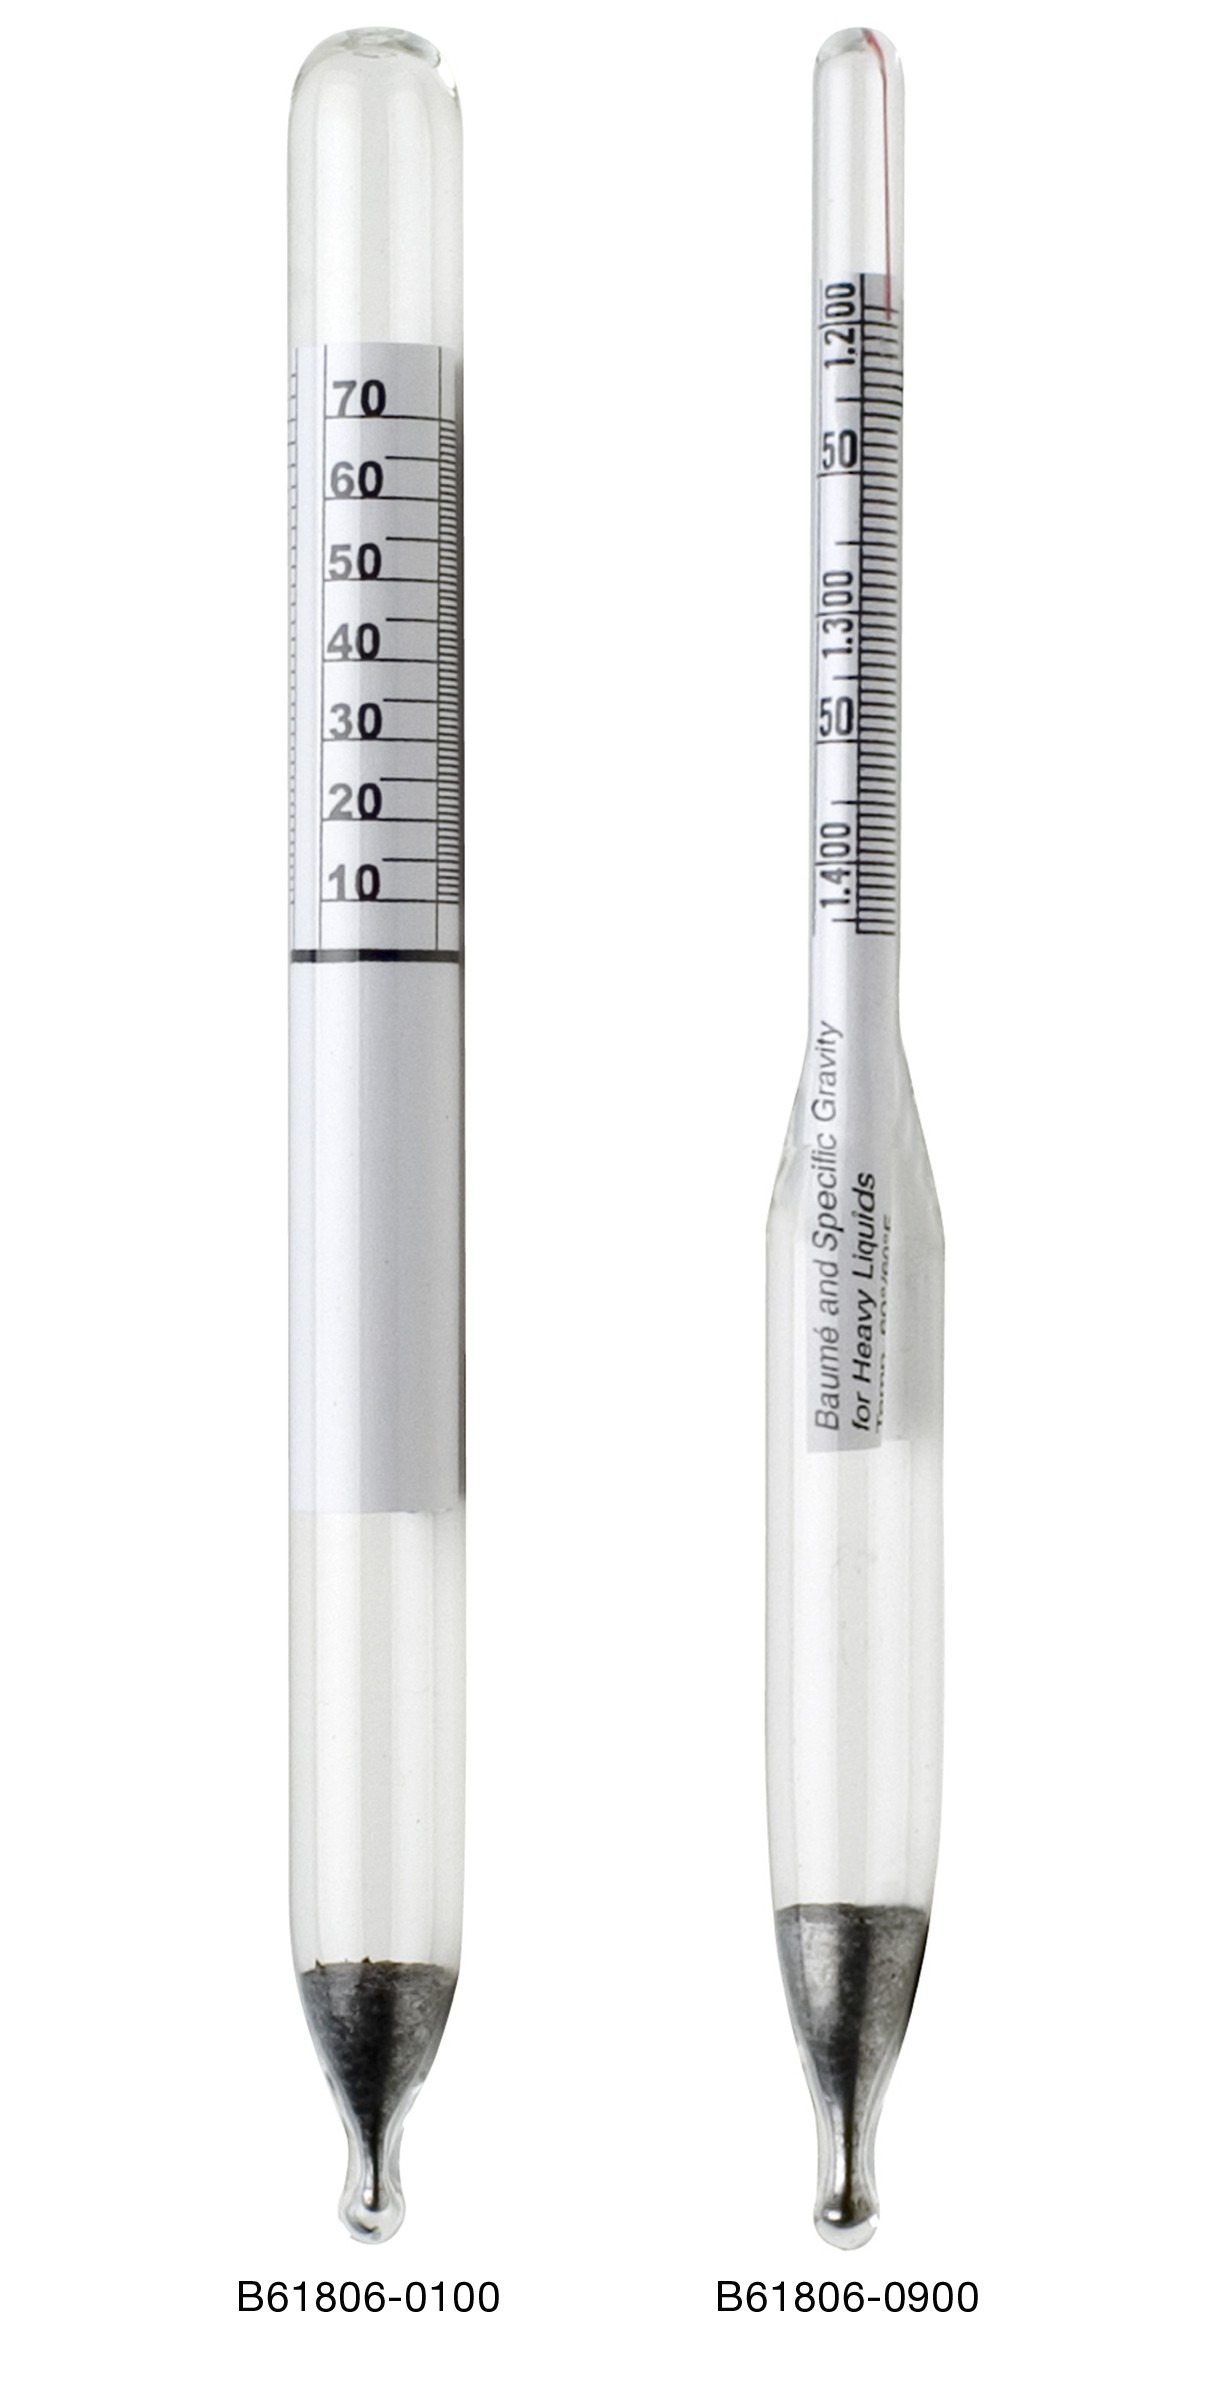 SP Bel-Art, H-B DURAC 1.600/1.825 Specific Gravity and 54/64 Degree Baume Dual Scale Hydrometer for Liquids Heavier Than Water